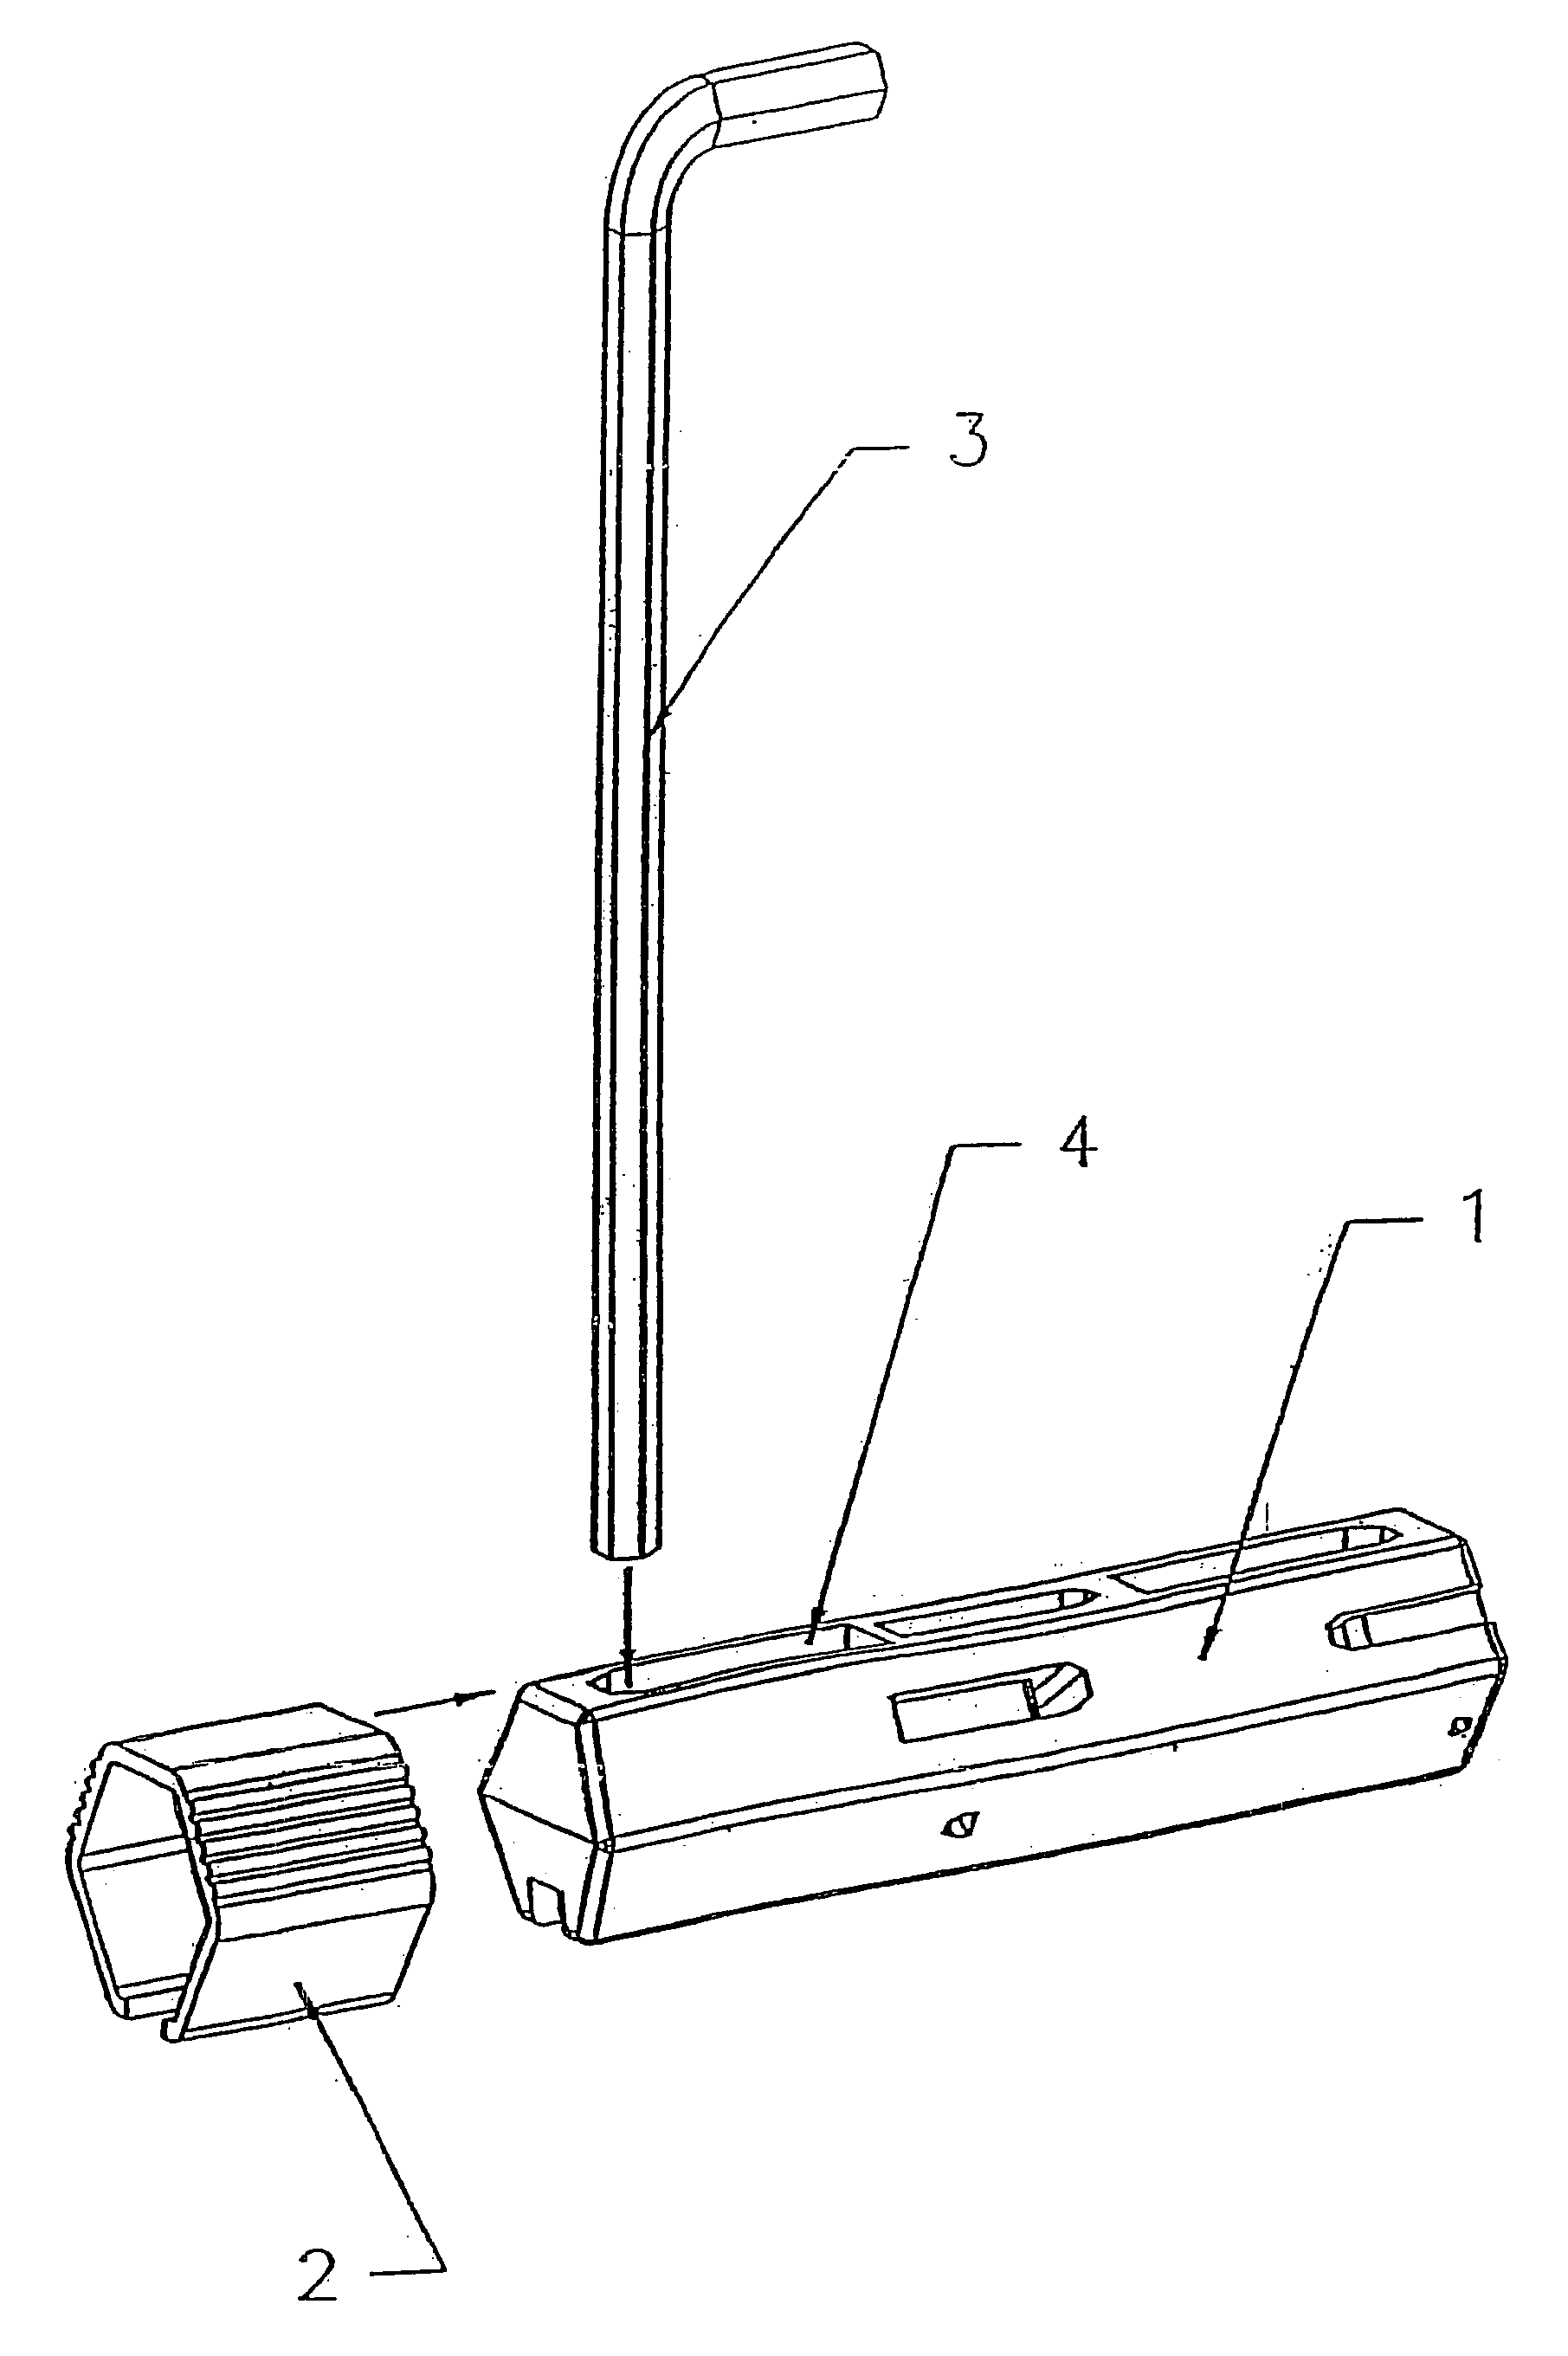 Tool handle for holding multiple tools of different sizes during use